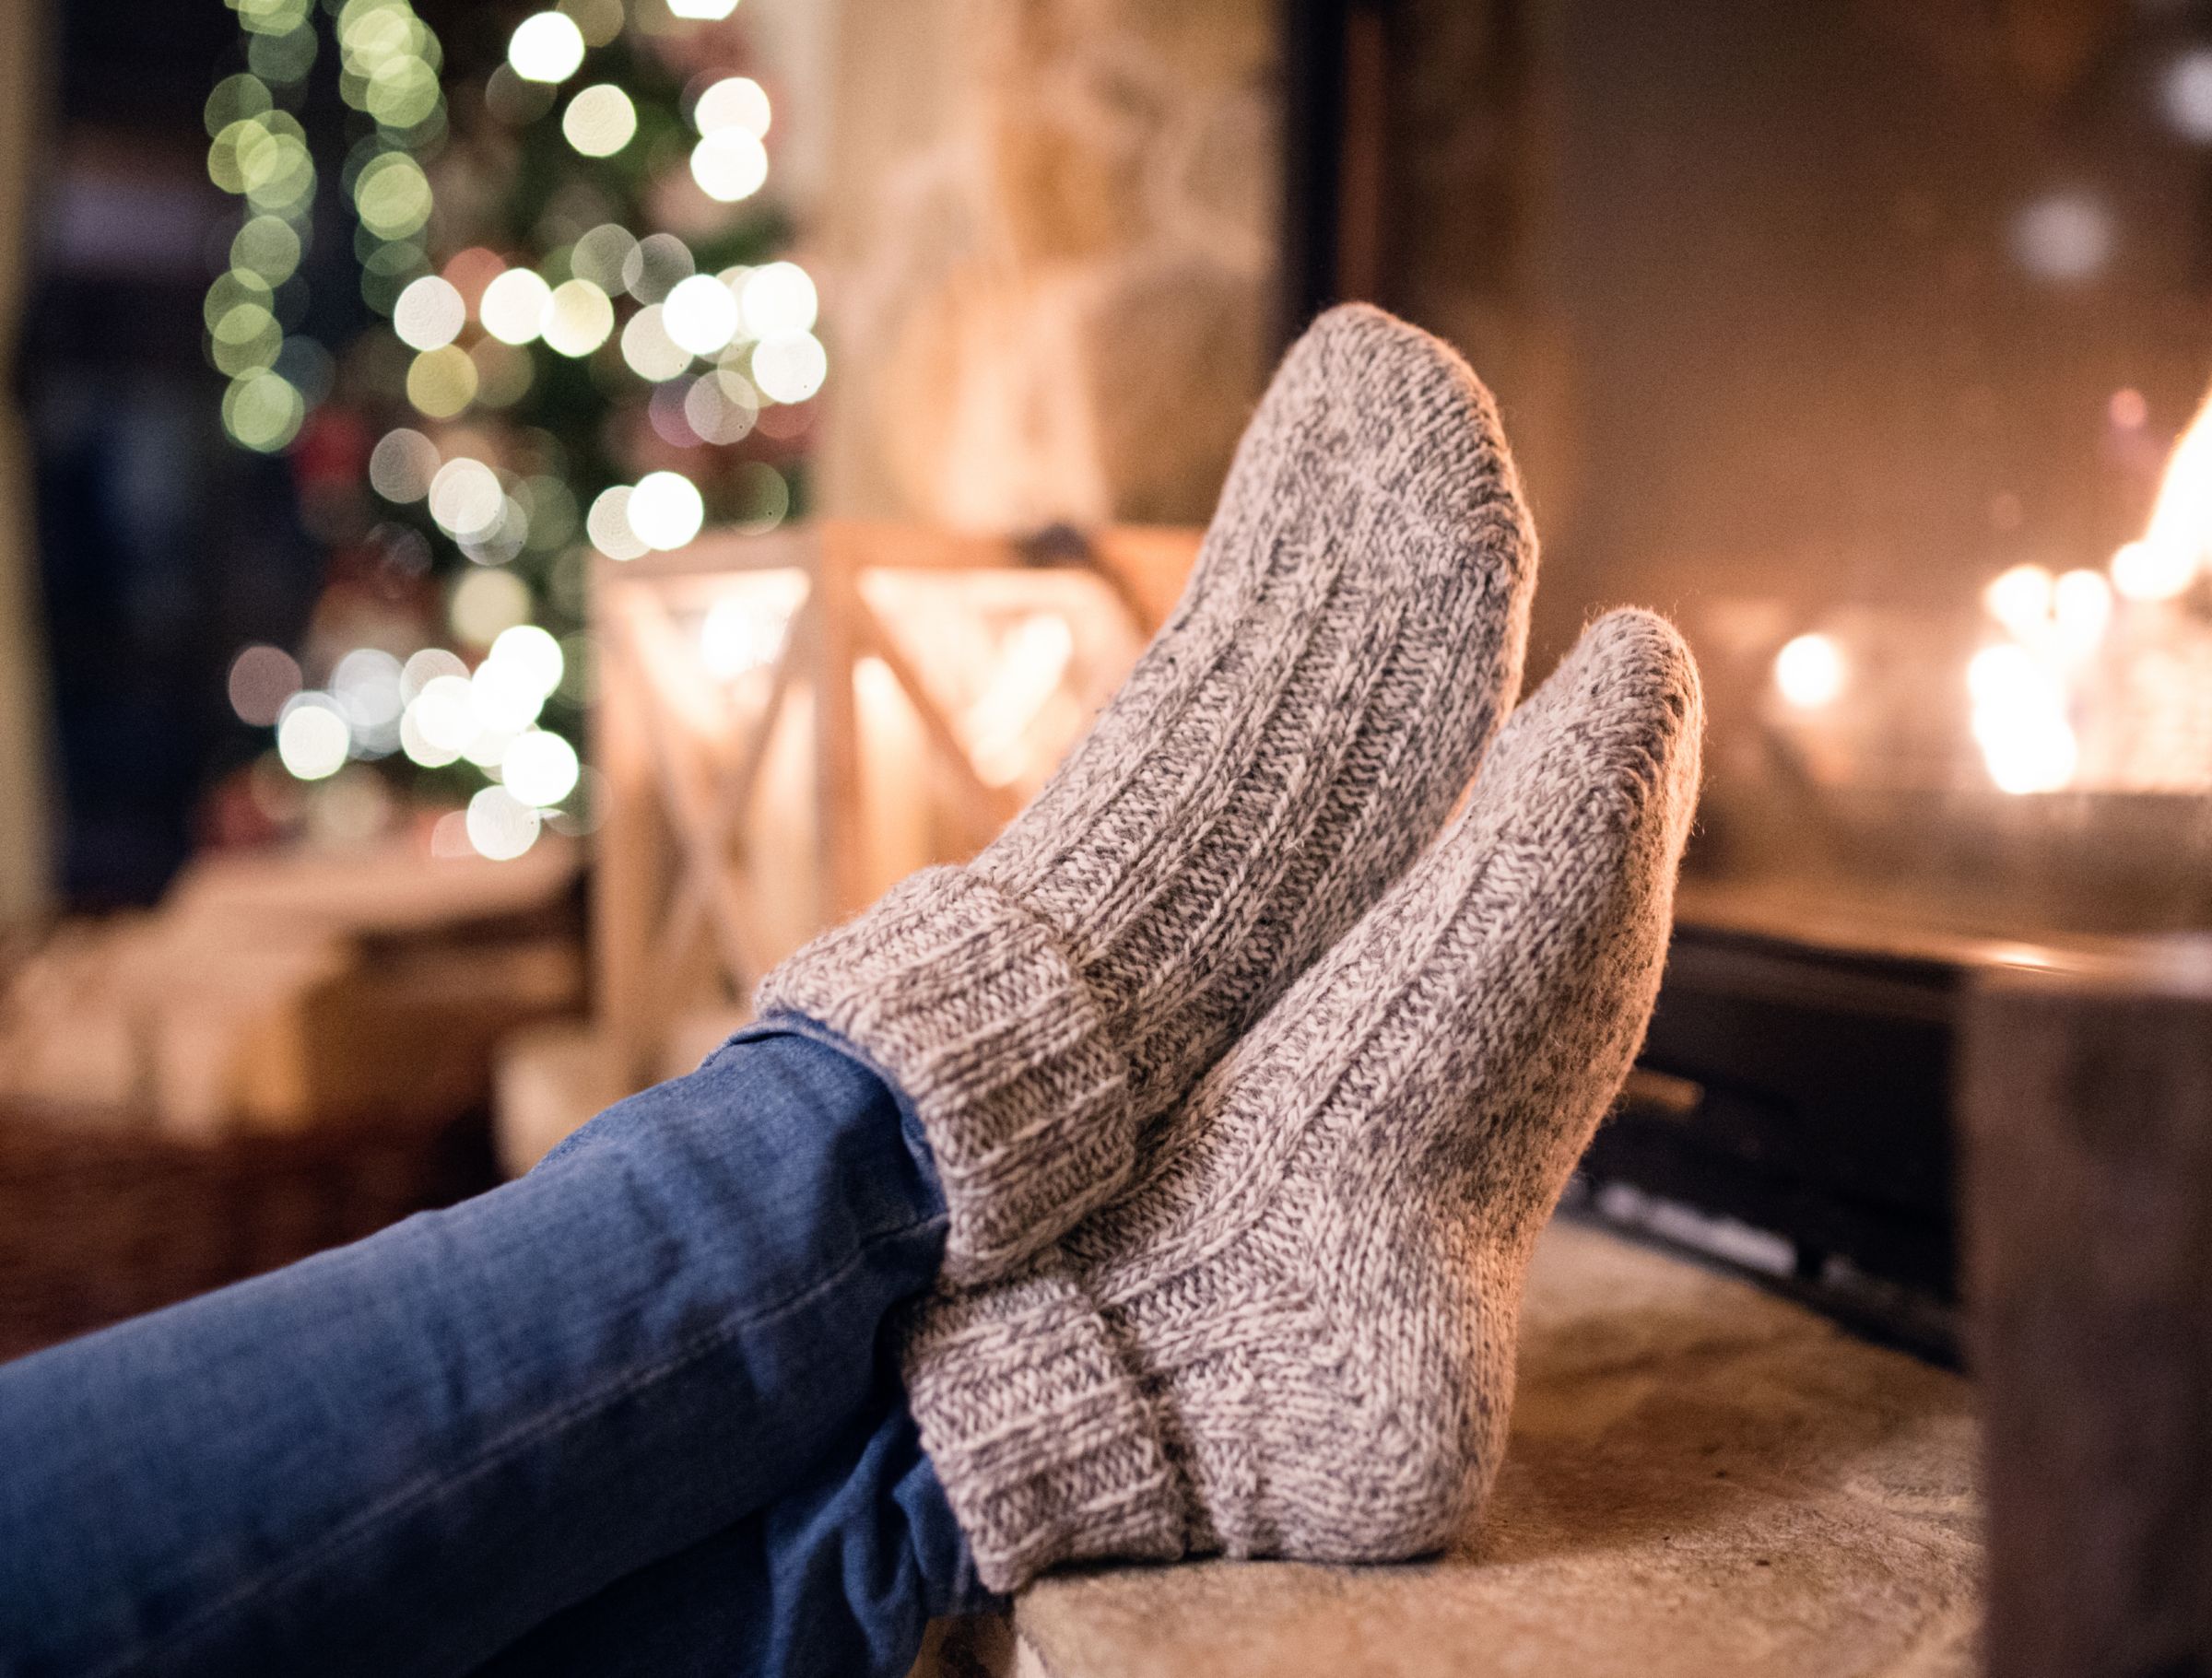 Self-care tips for a more mindful Christmas